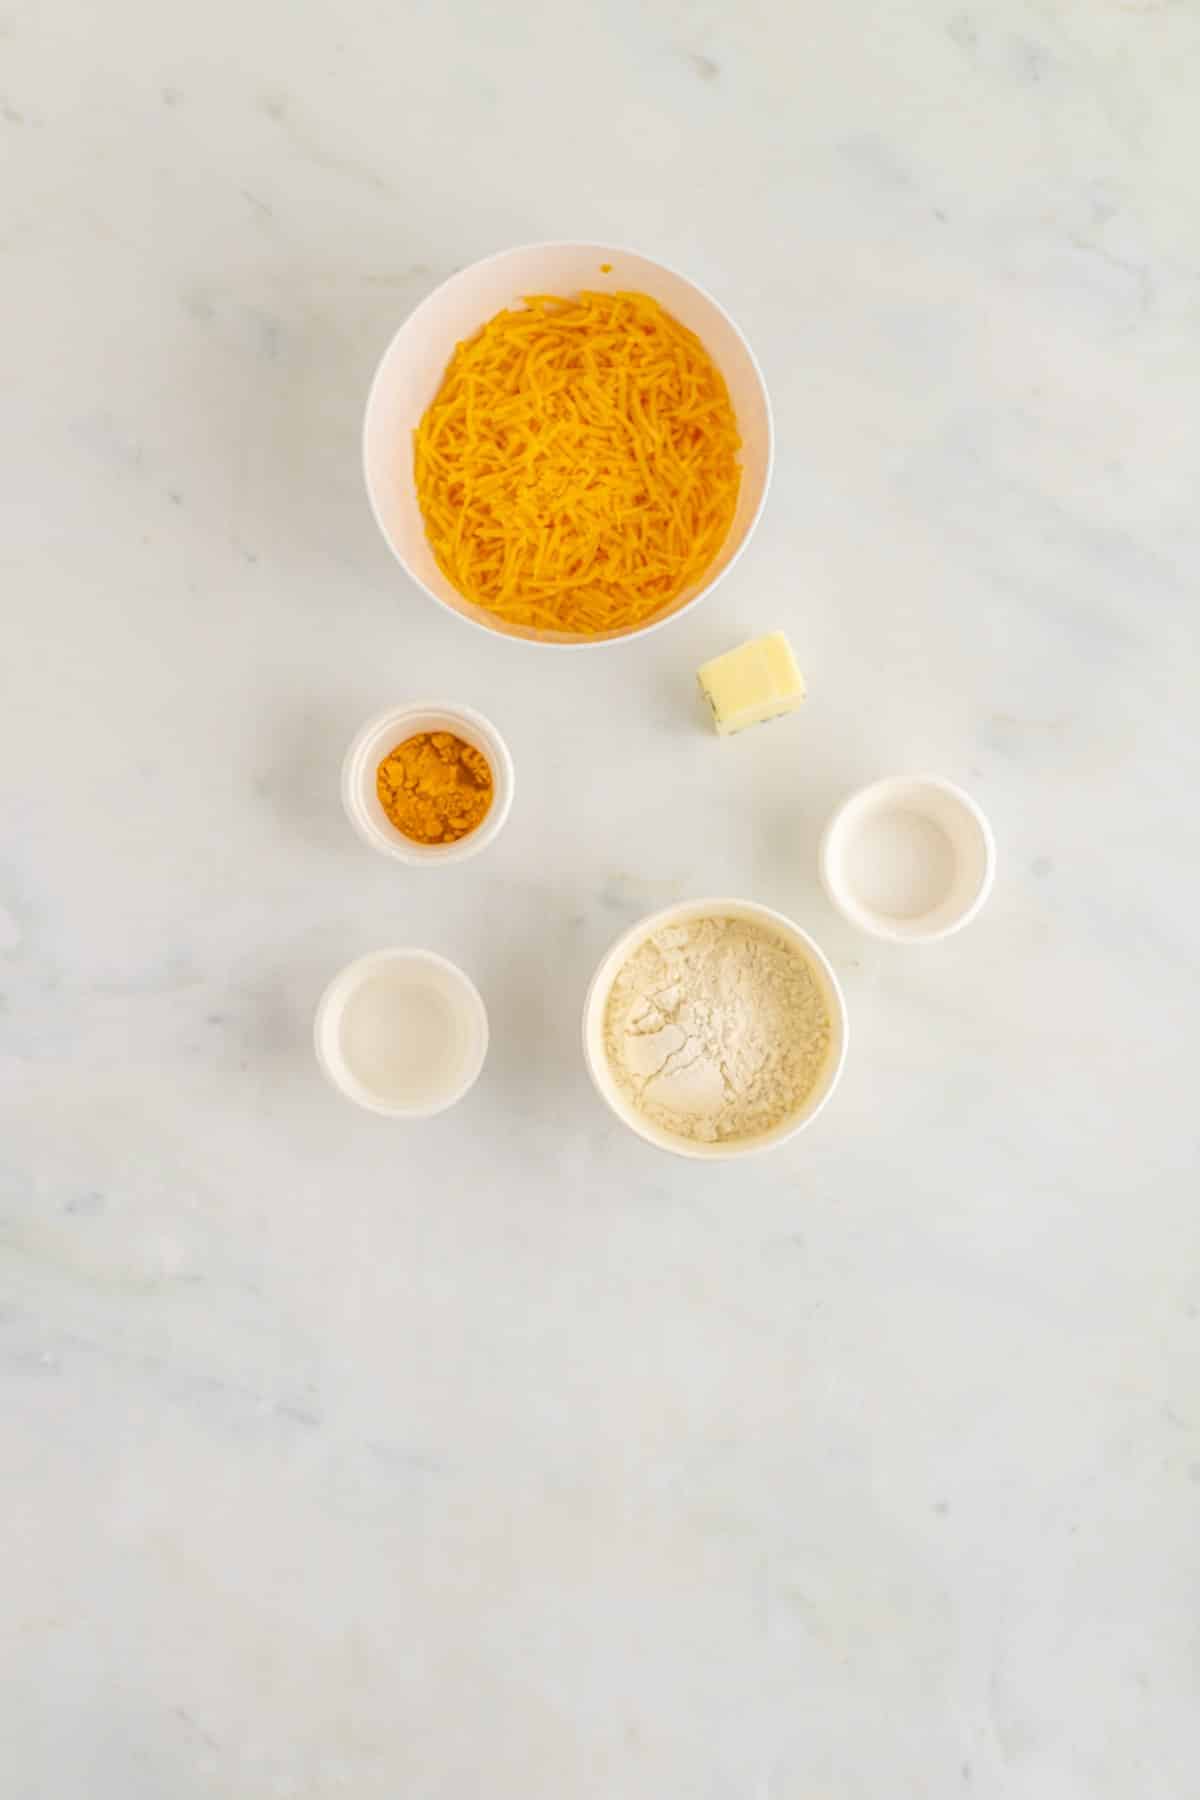 Homemade Cheez-Its Ingredients. 